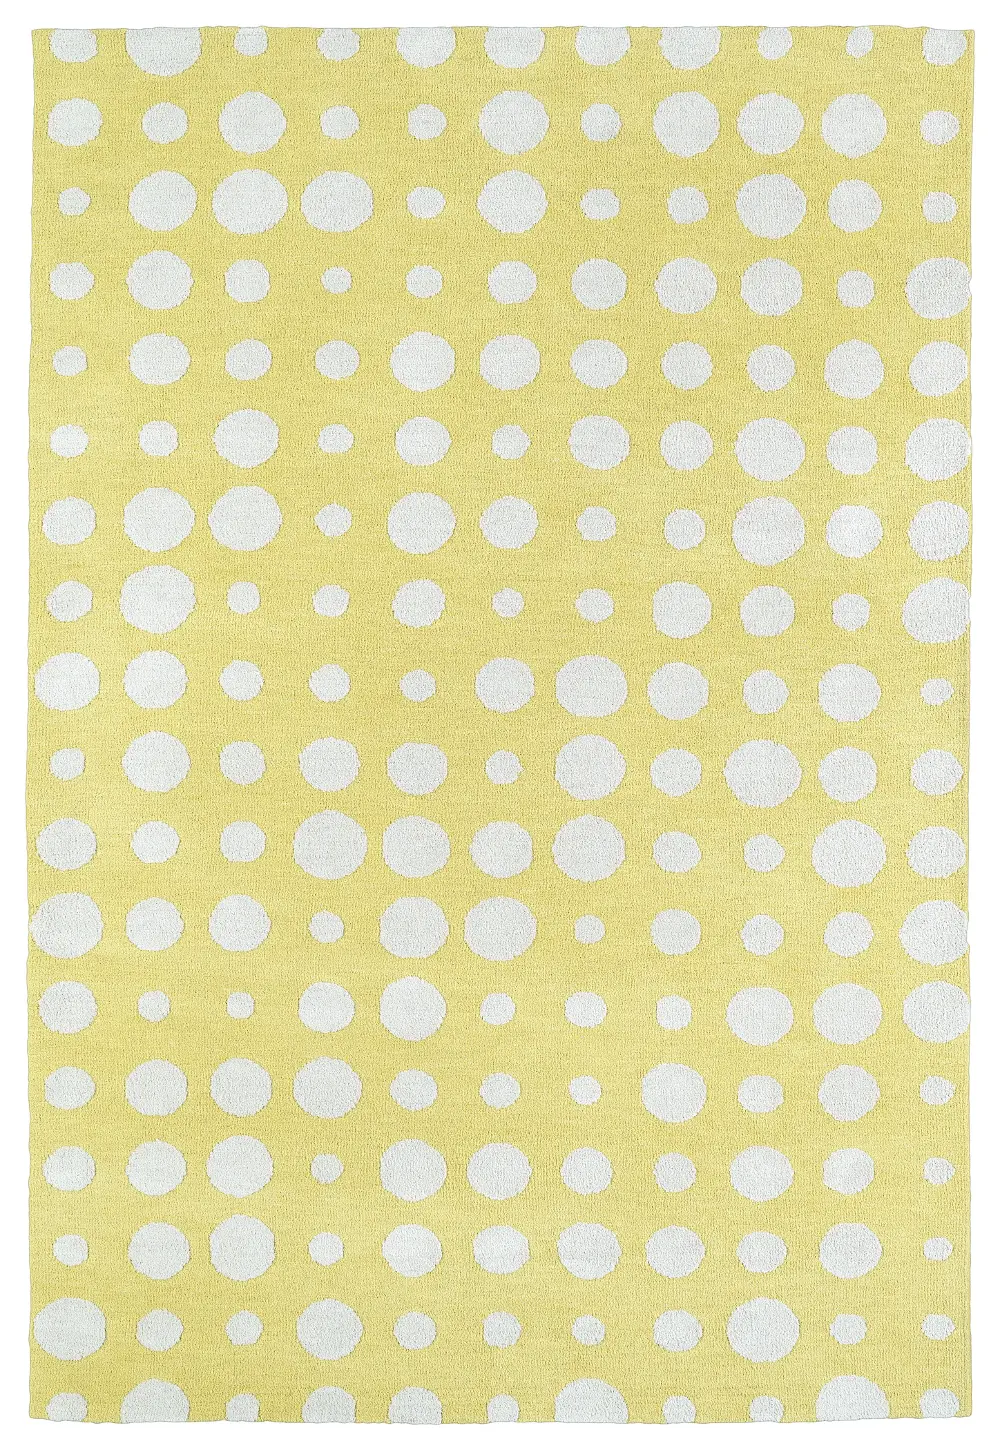 5 x 7 Medium Dotted Yellow and Ivory Area Rug - Lily & Liam-1